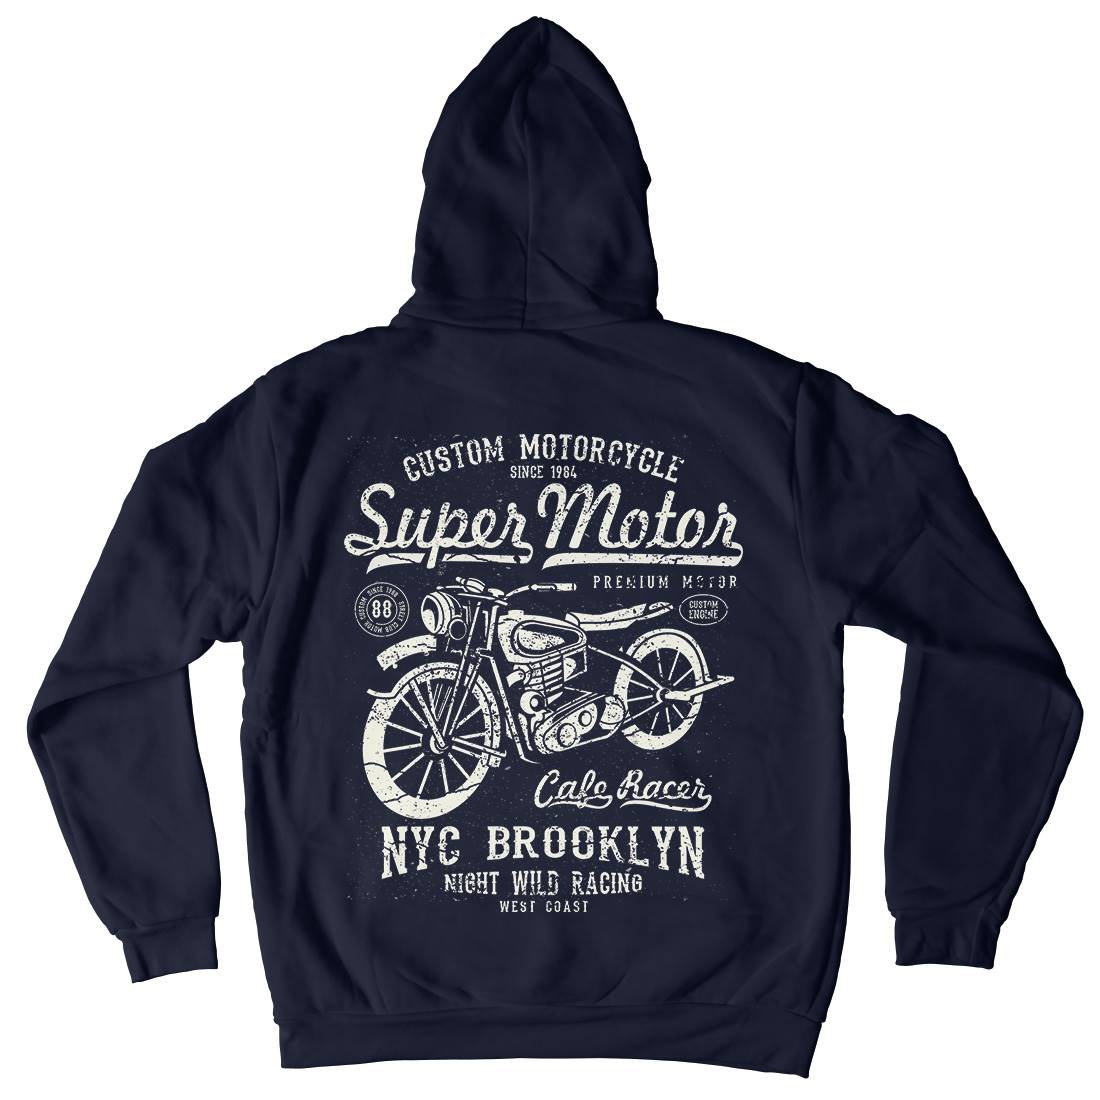 Super Motor Mens Hoodie With Pocket Motorcycles A166